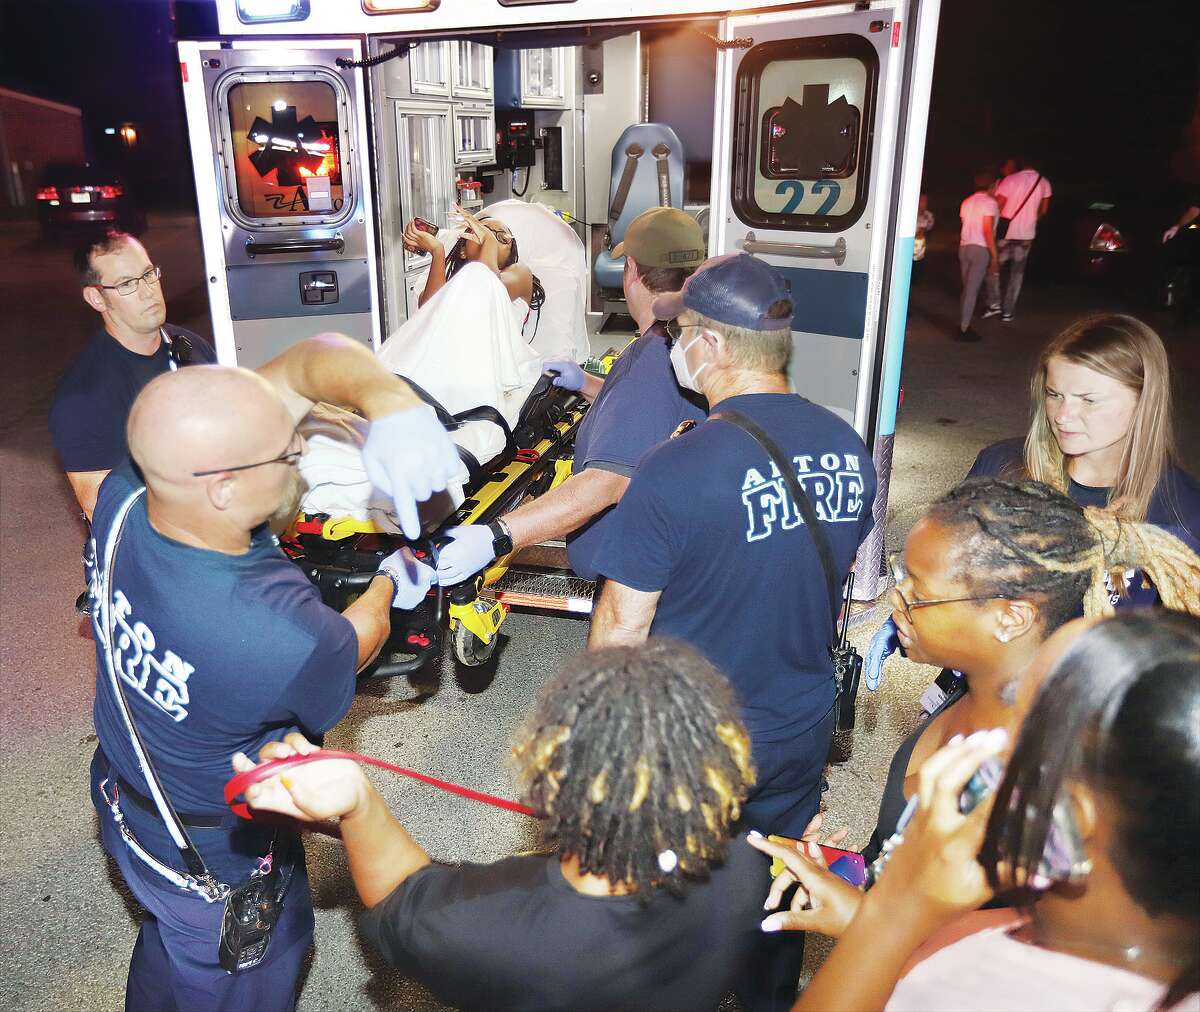 John Badman|The Telegraph First responders load one of two shooting victims into an ambulance late Monday night in the 800 block of Oakwood Avenue in Alton.